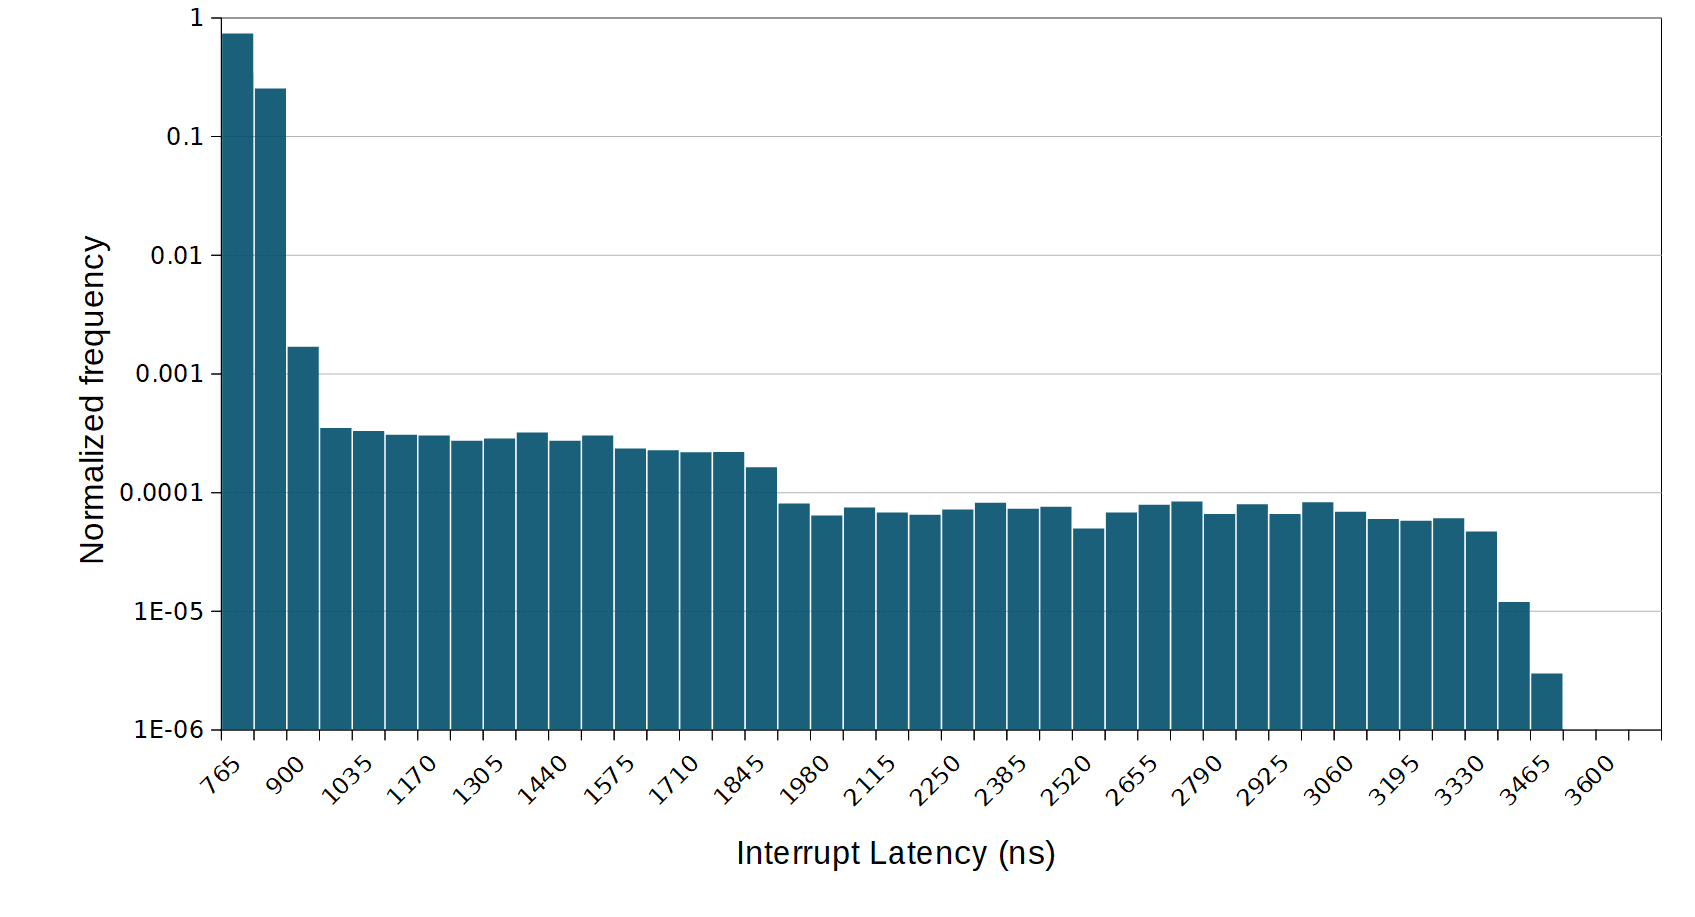 Distribution of interrupt latency for an idle system in nanoseconds.